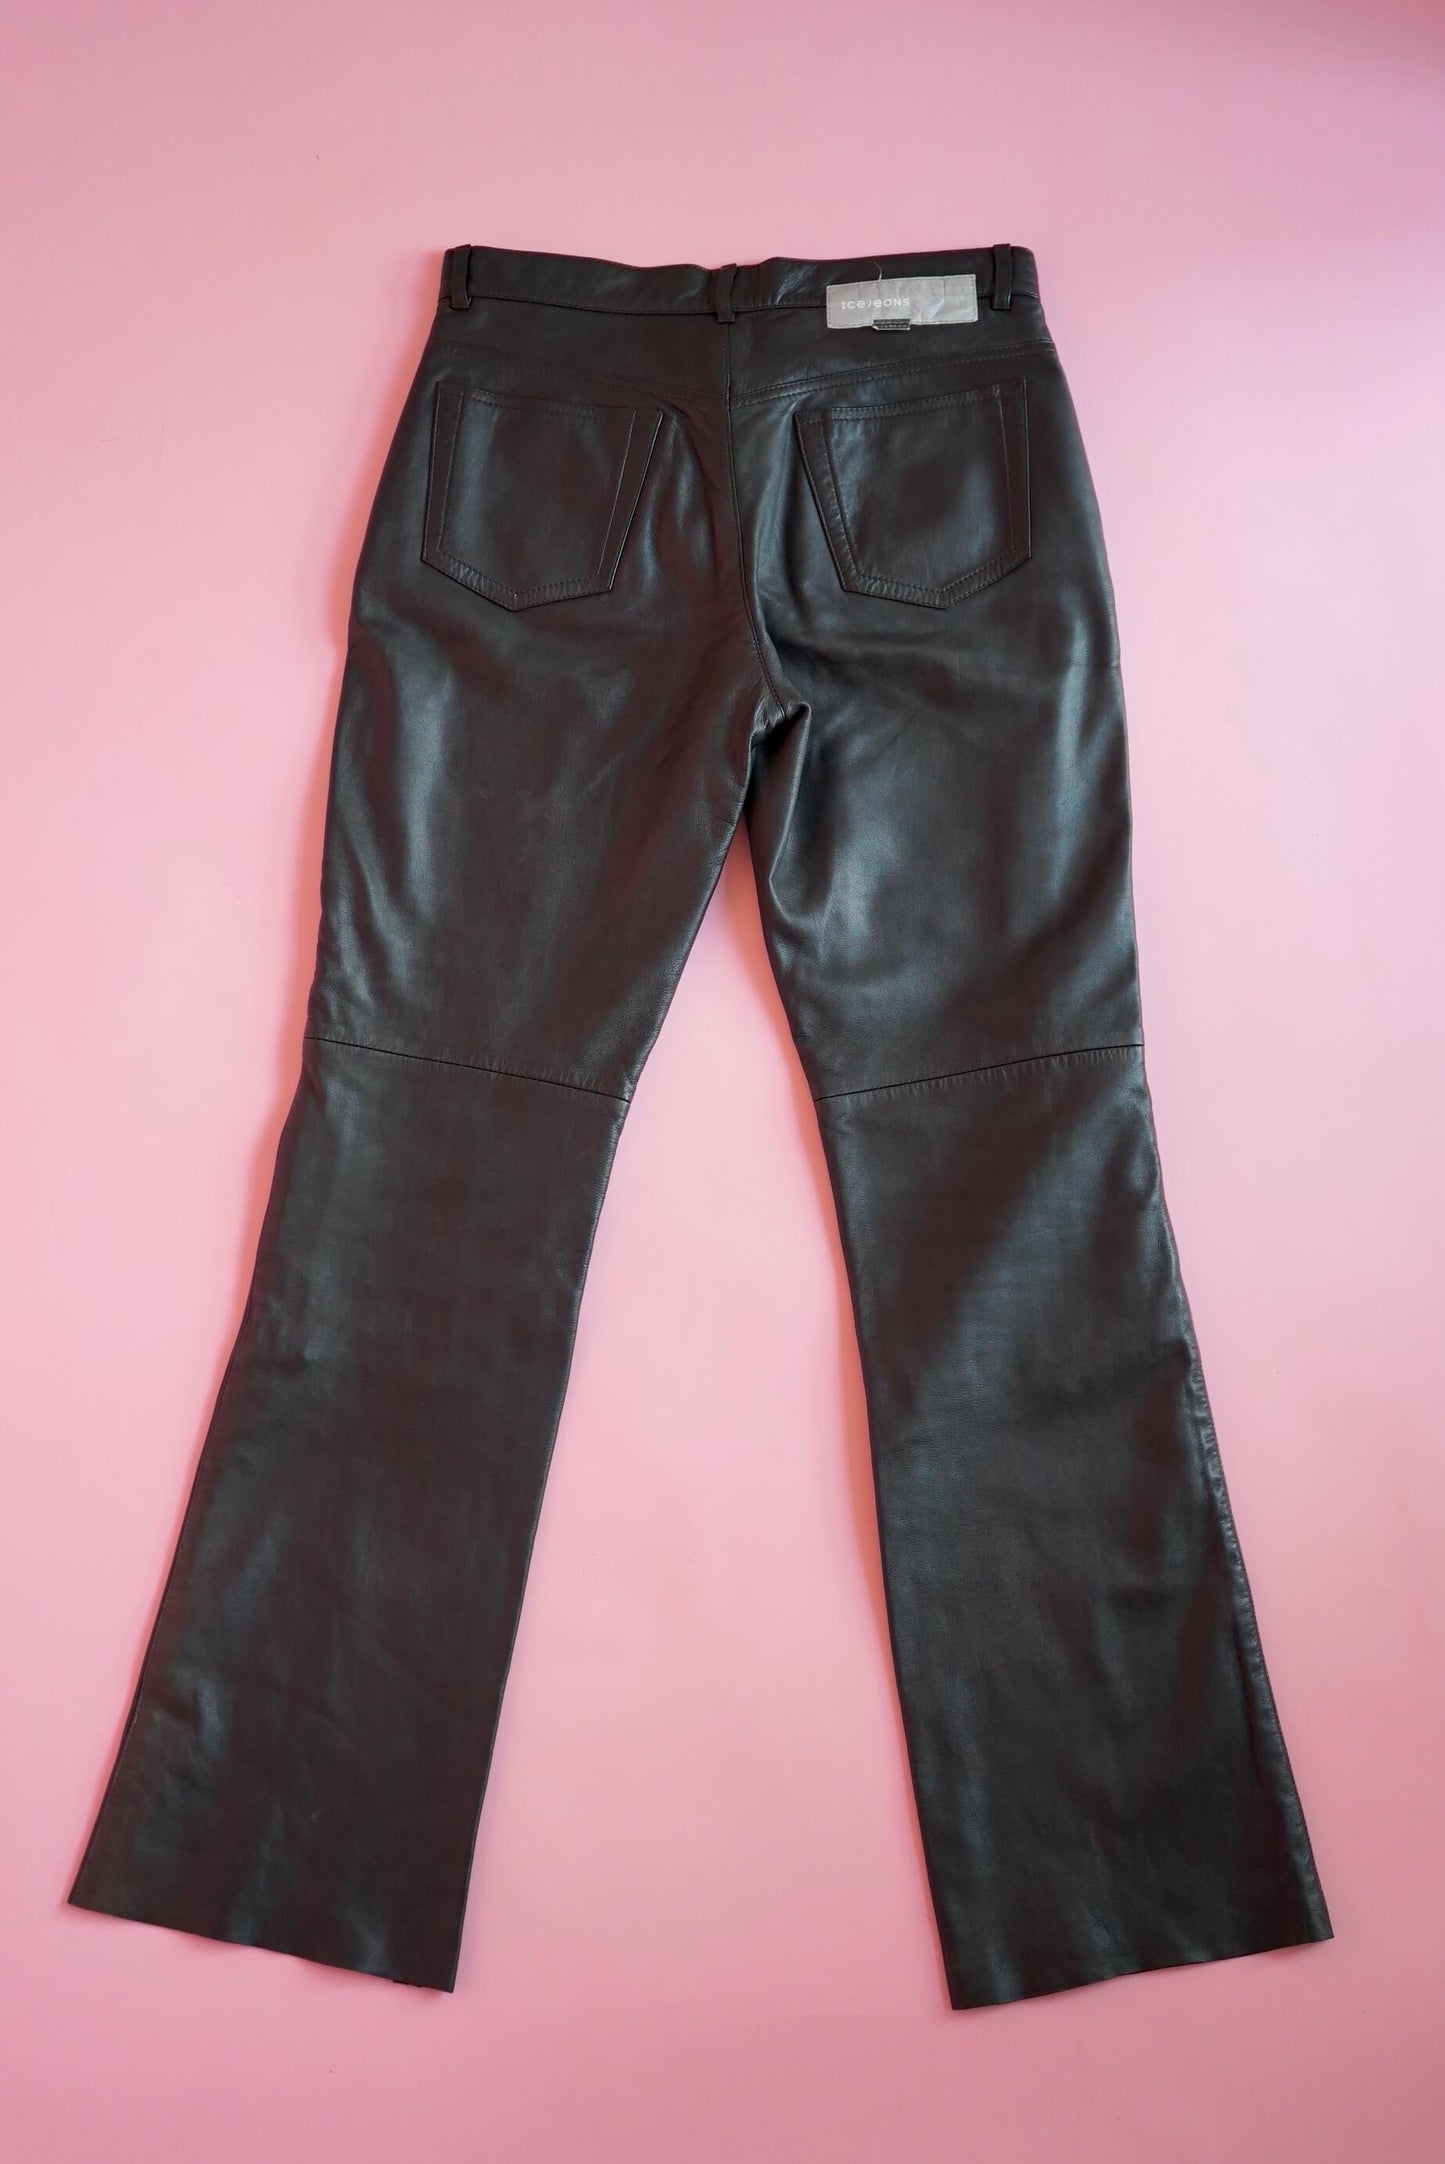 Iceberg Chocolate Brown Soft Leather Trousers Size S